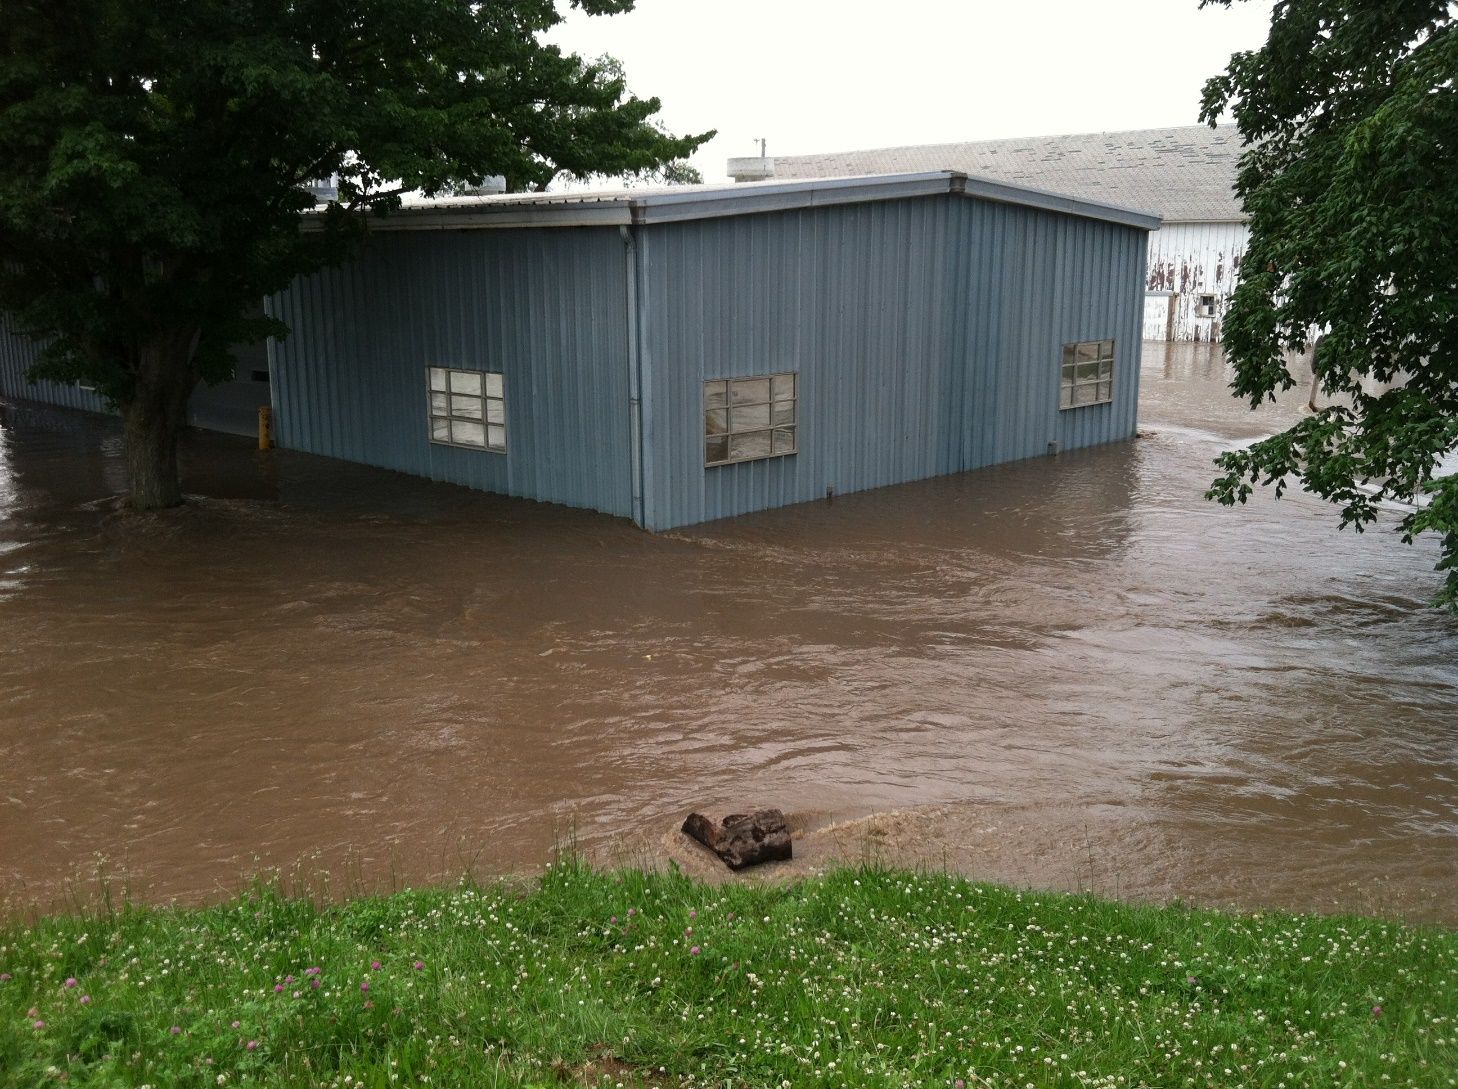 Des Moines Water Works' flooded storage building.